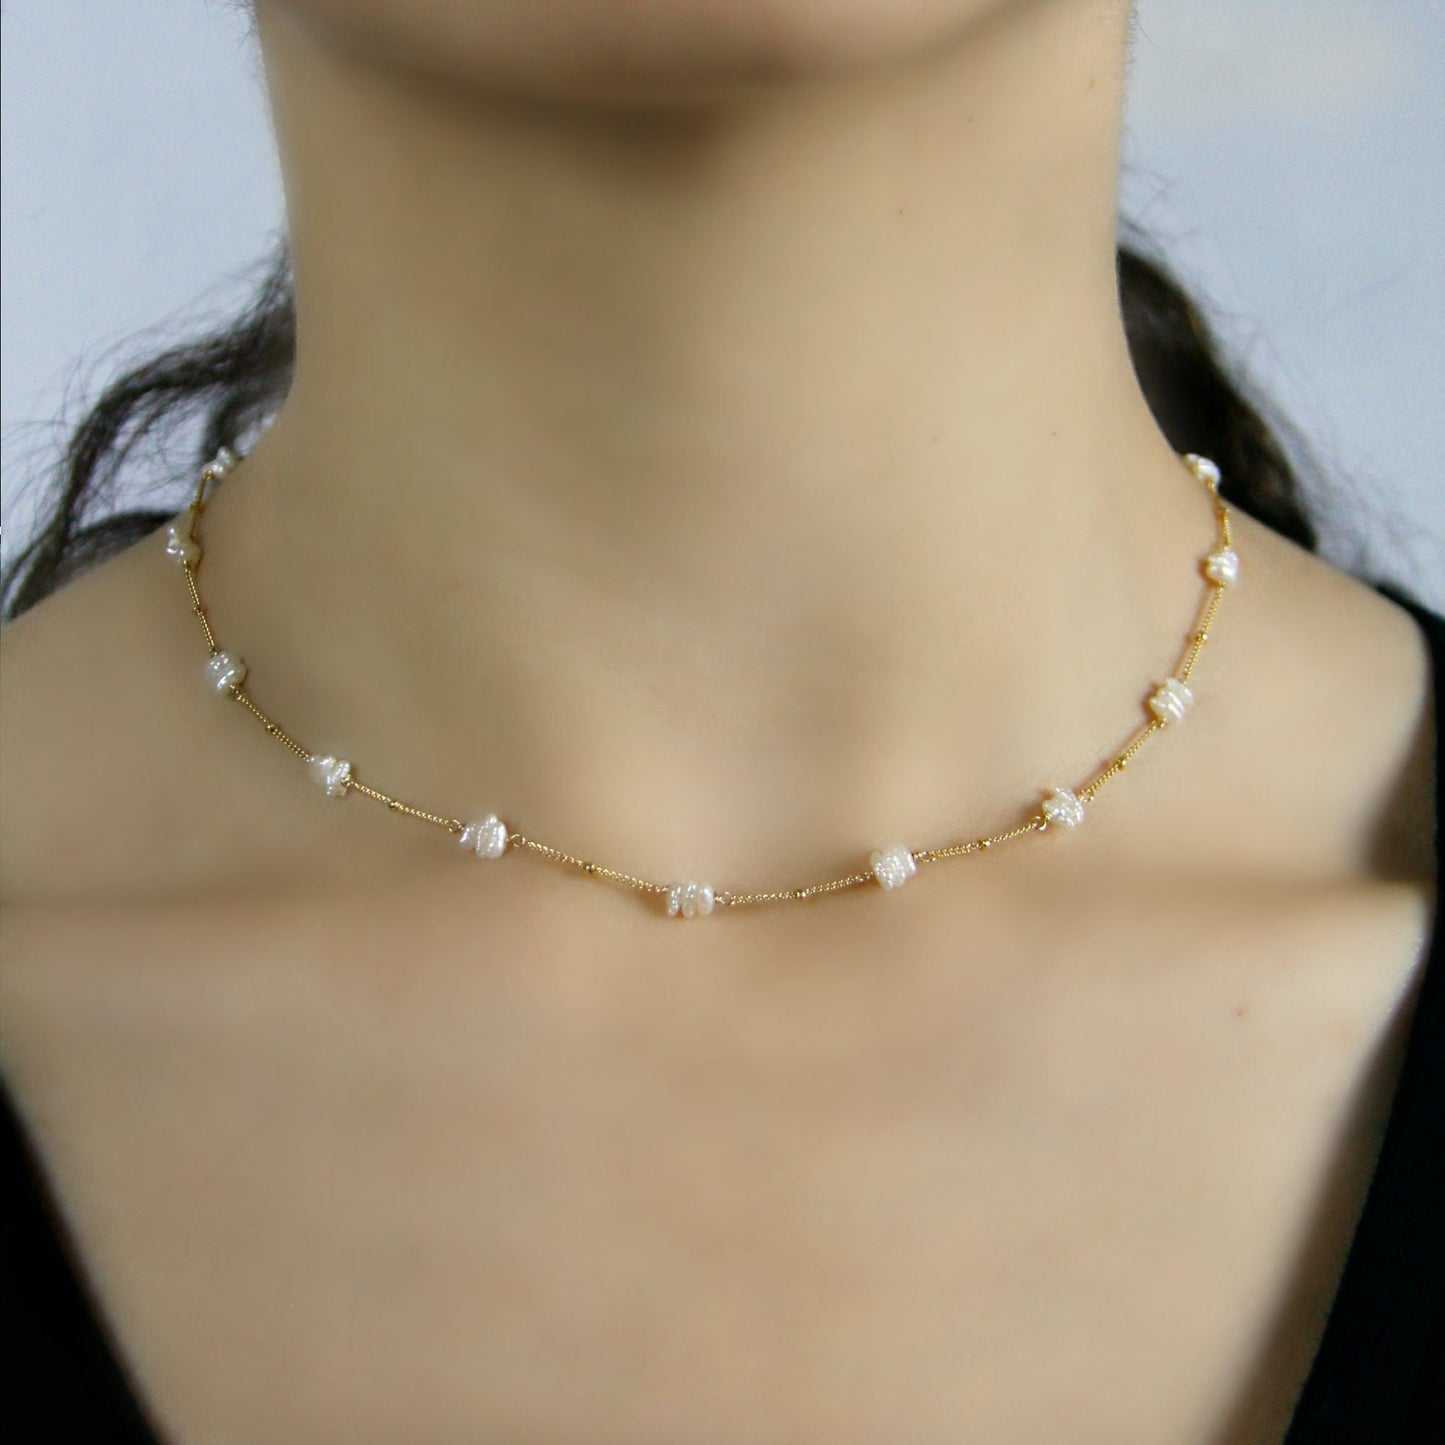 Pearl Necklace Choker Necklace Layering Necklace Dainty Necklace Handmade Jewelry June Birthstone Wedding Necklace Pearl Jewelry